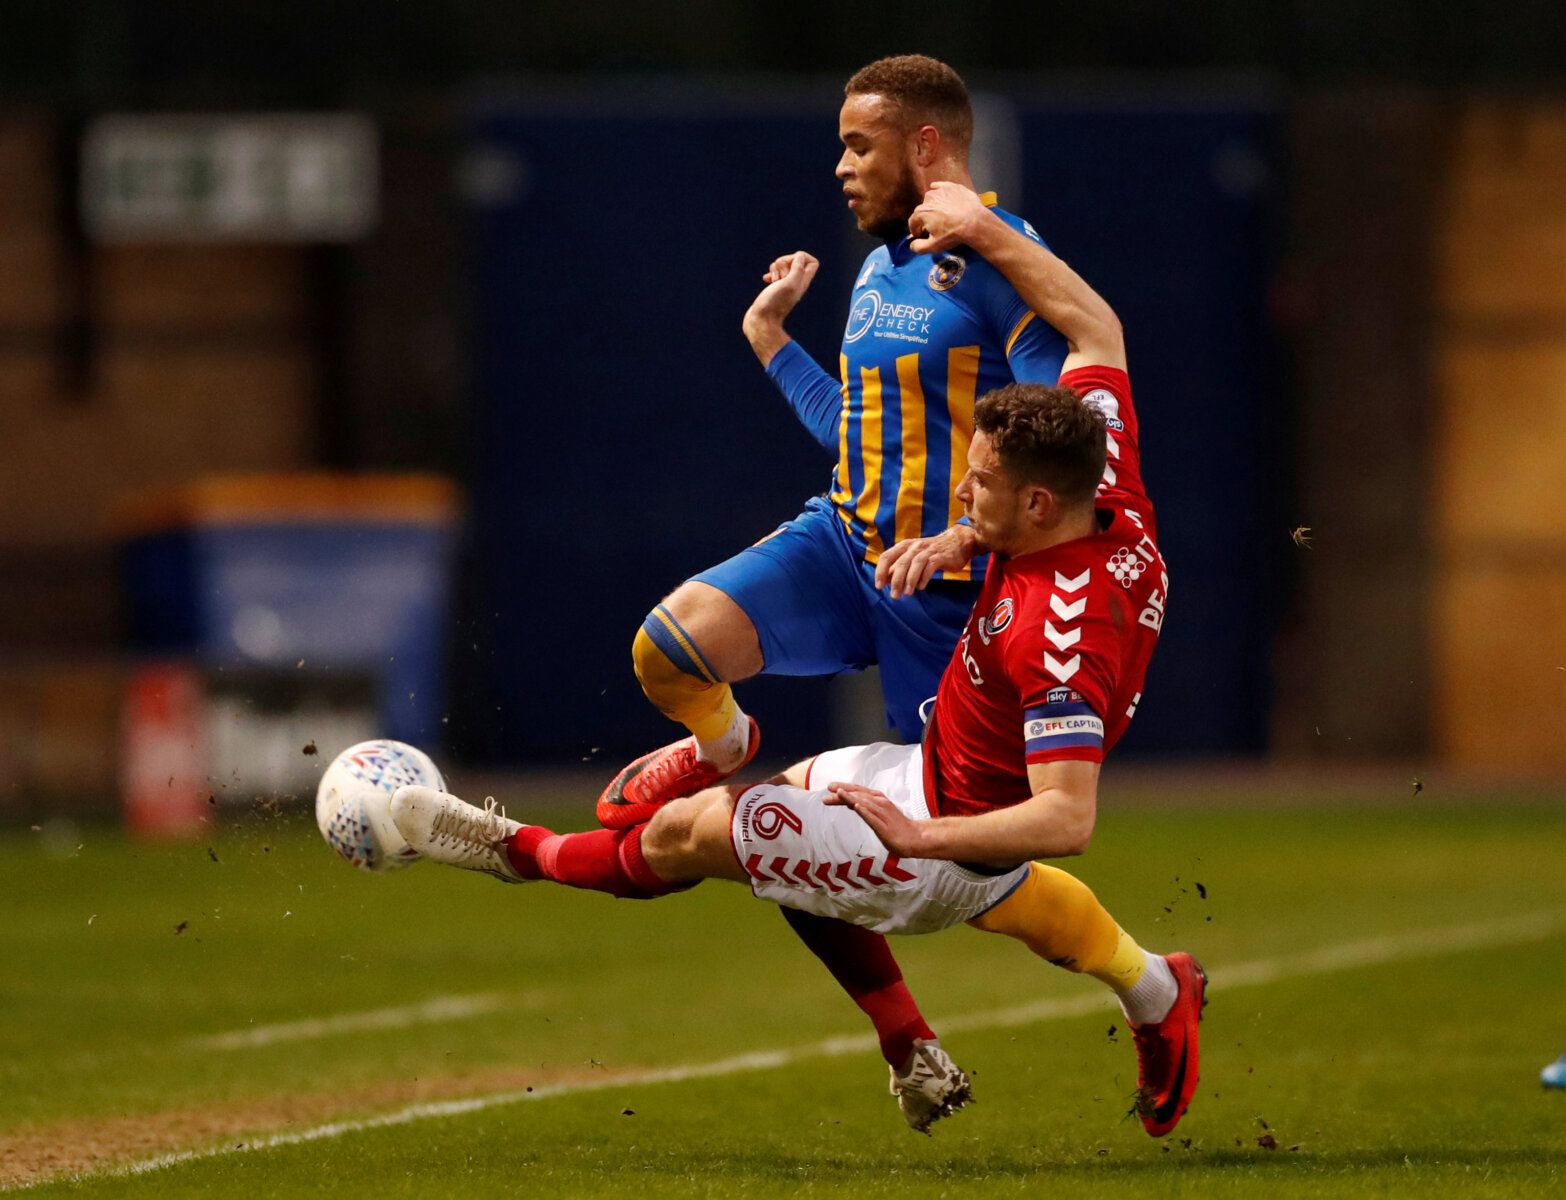 Soccer Football - League One - Shrewsbury Town vs Charlton Athletic - Montgomery Waters Meadow, Shrewsbury, Britain - April 17, 2018   Shrewsbury Town's Carlton Morris in action with Charlton's Jason Pearce   Action Images/Andrew Boyers    EDITORIAL USE ONLY. No use with unauthorized audio, video, data, fixture lists, club/league logos or 